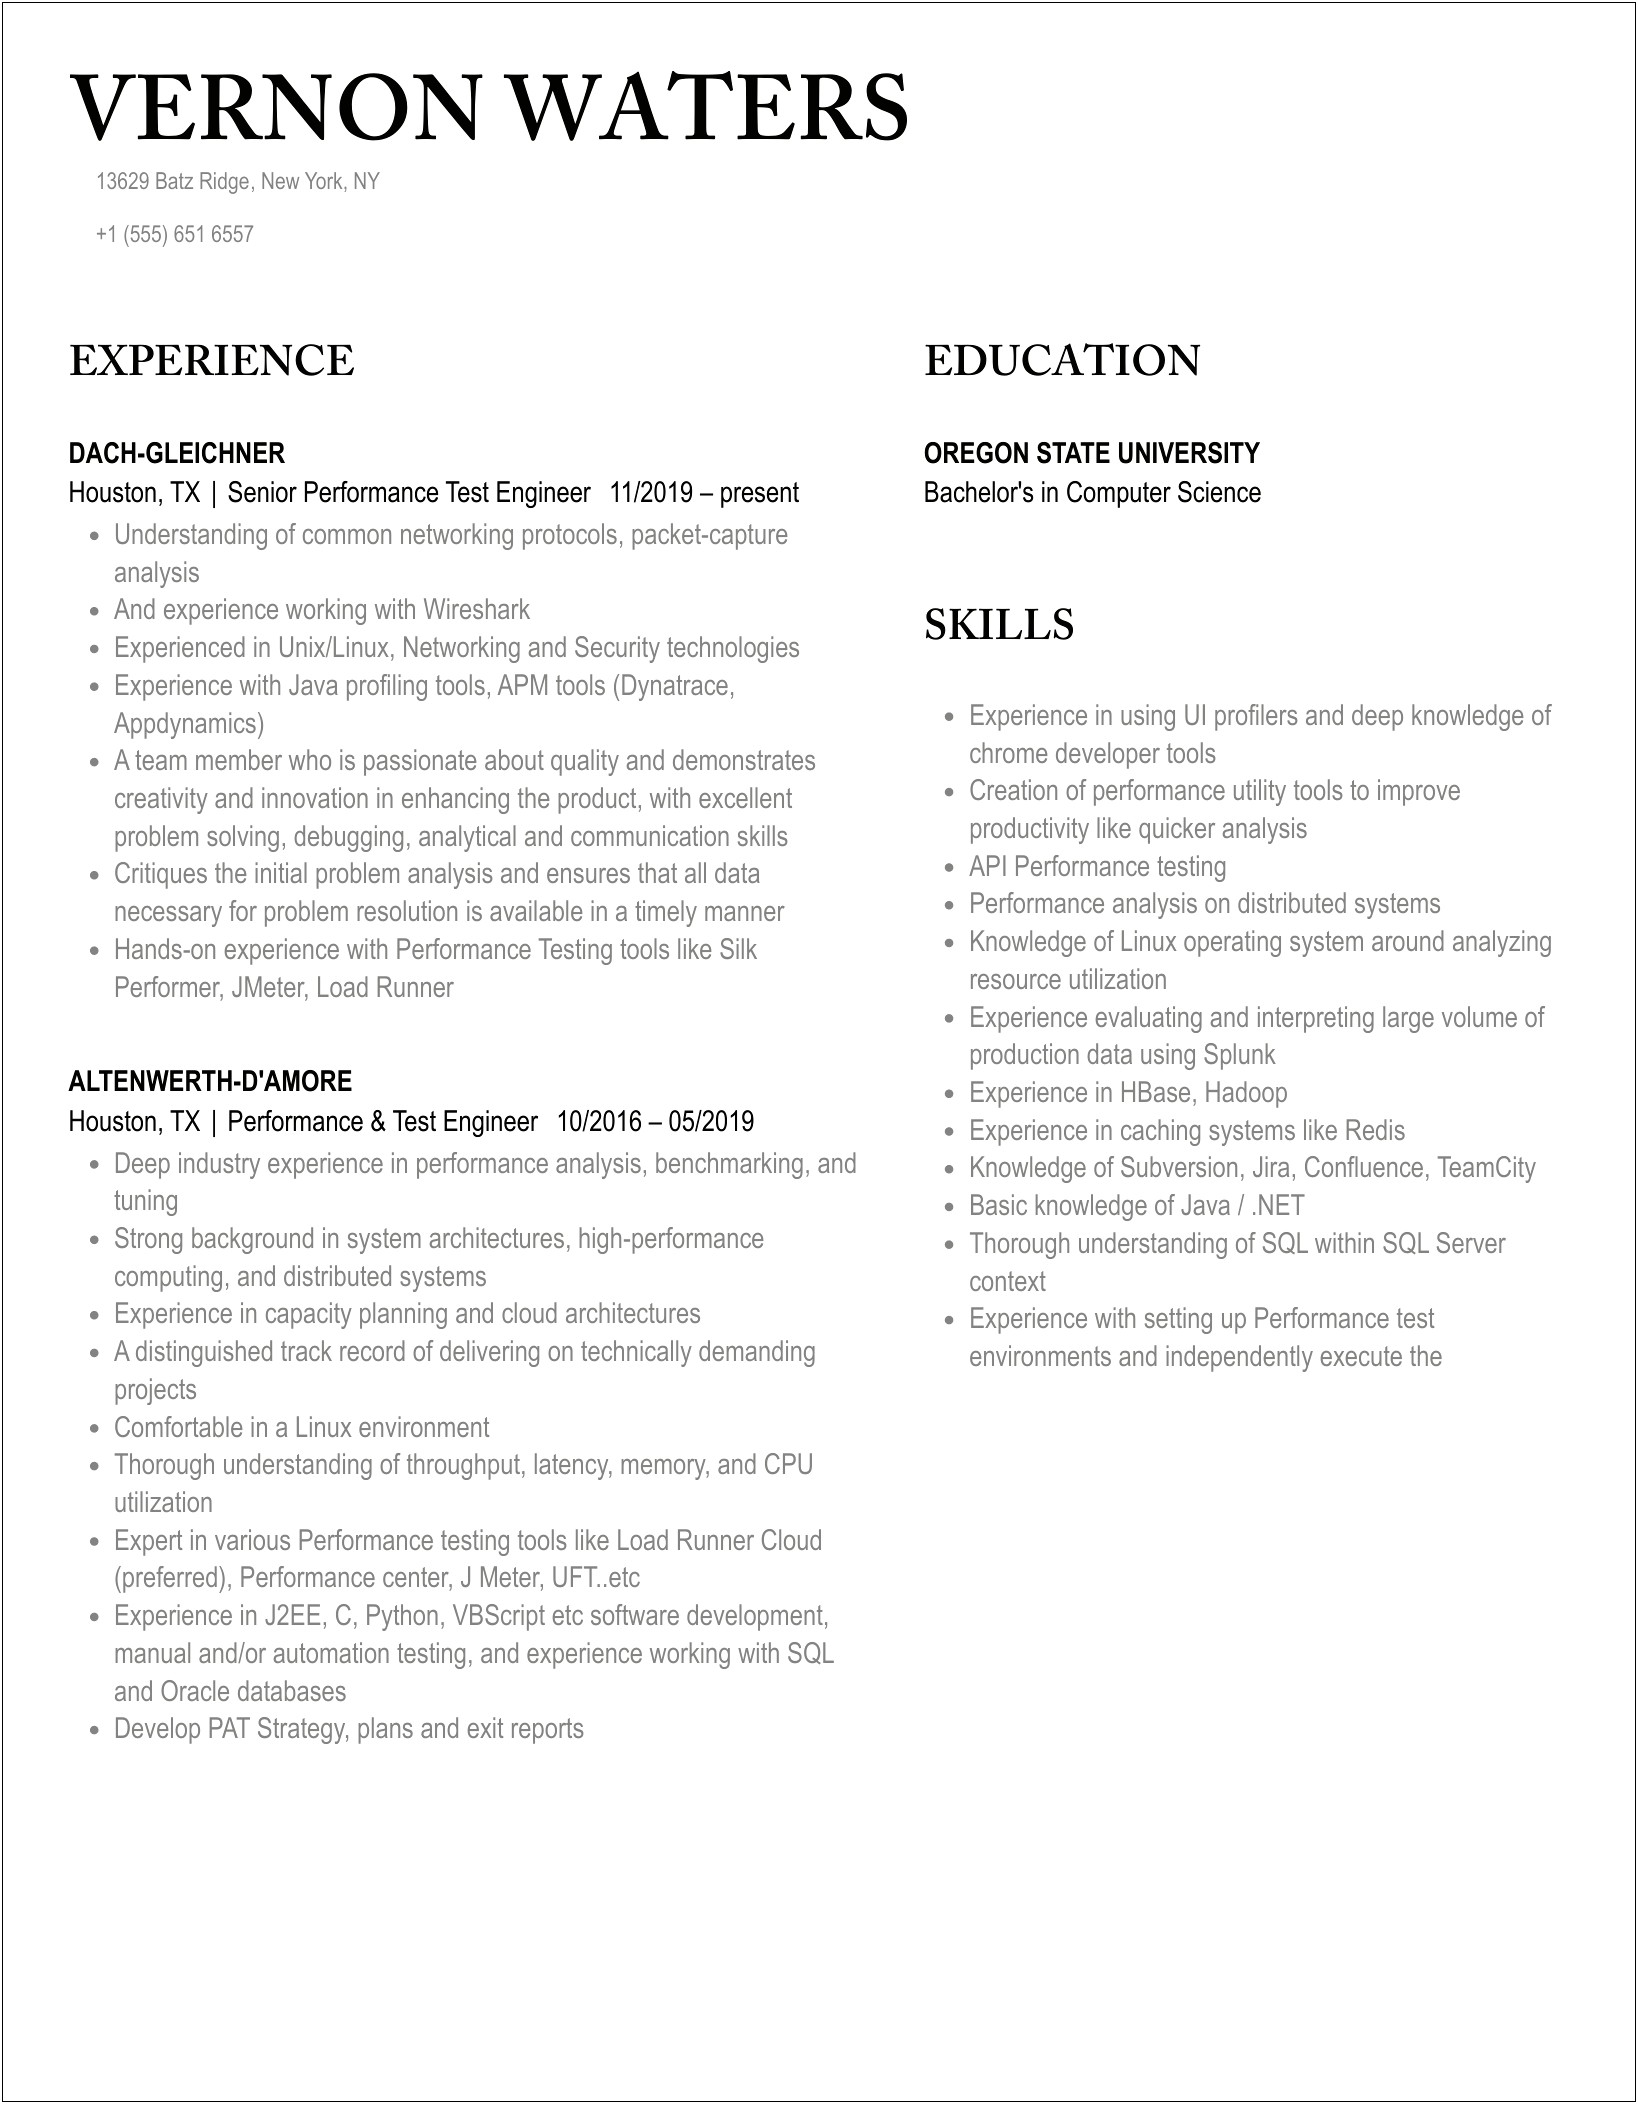 Performance Tester Resume 5 Years Experience